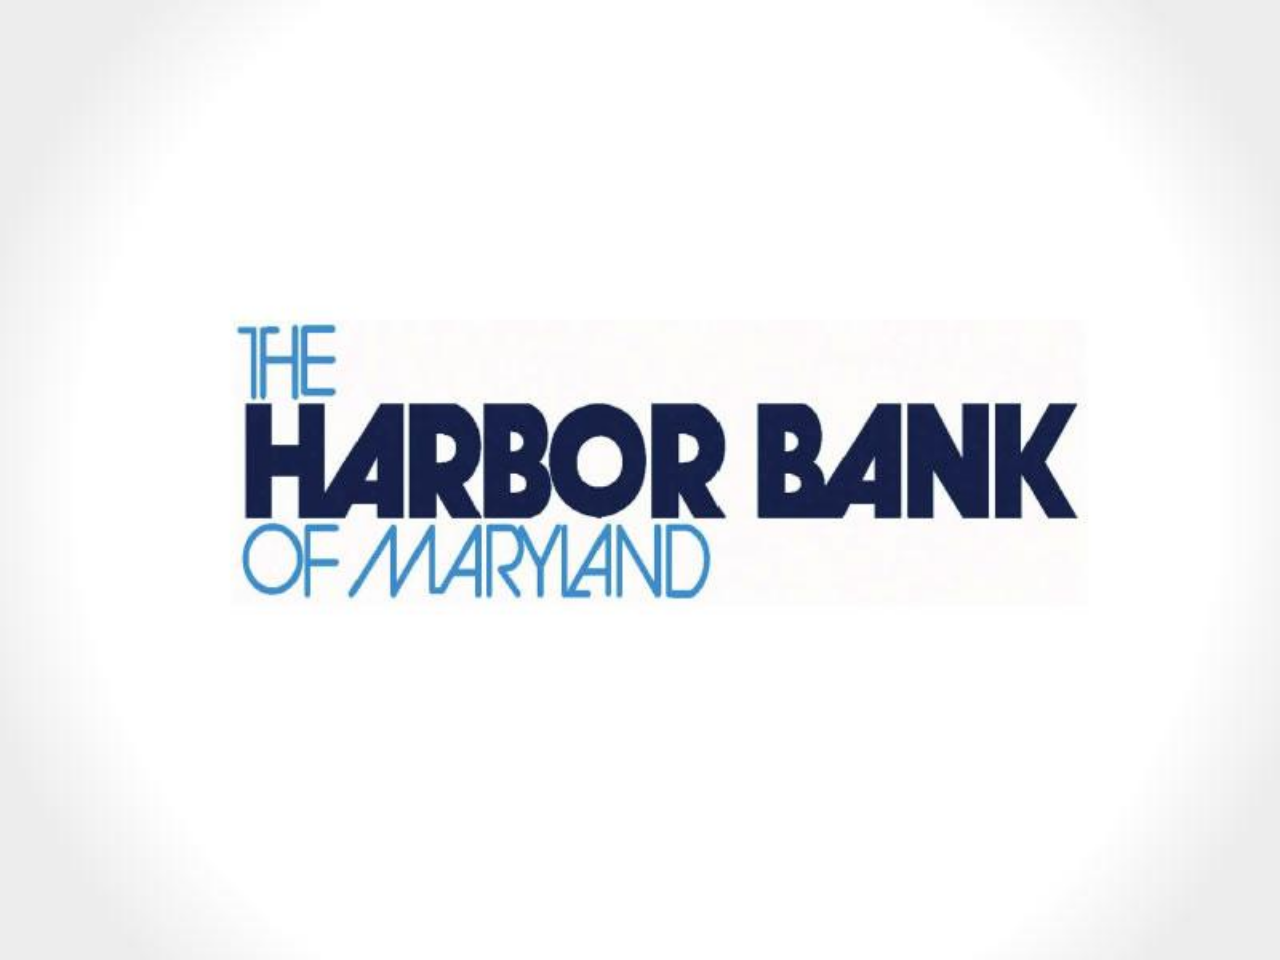 The Harbor Bank of Maryland